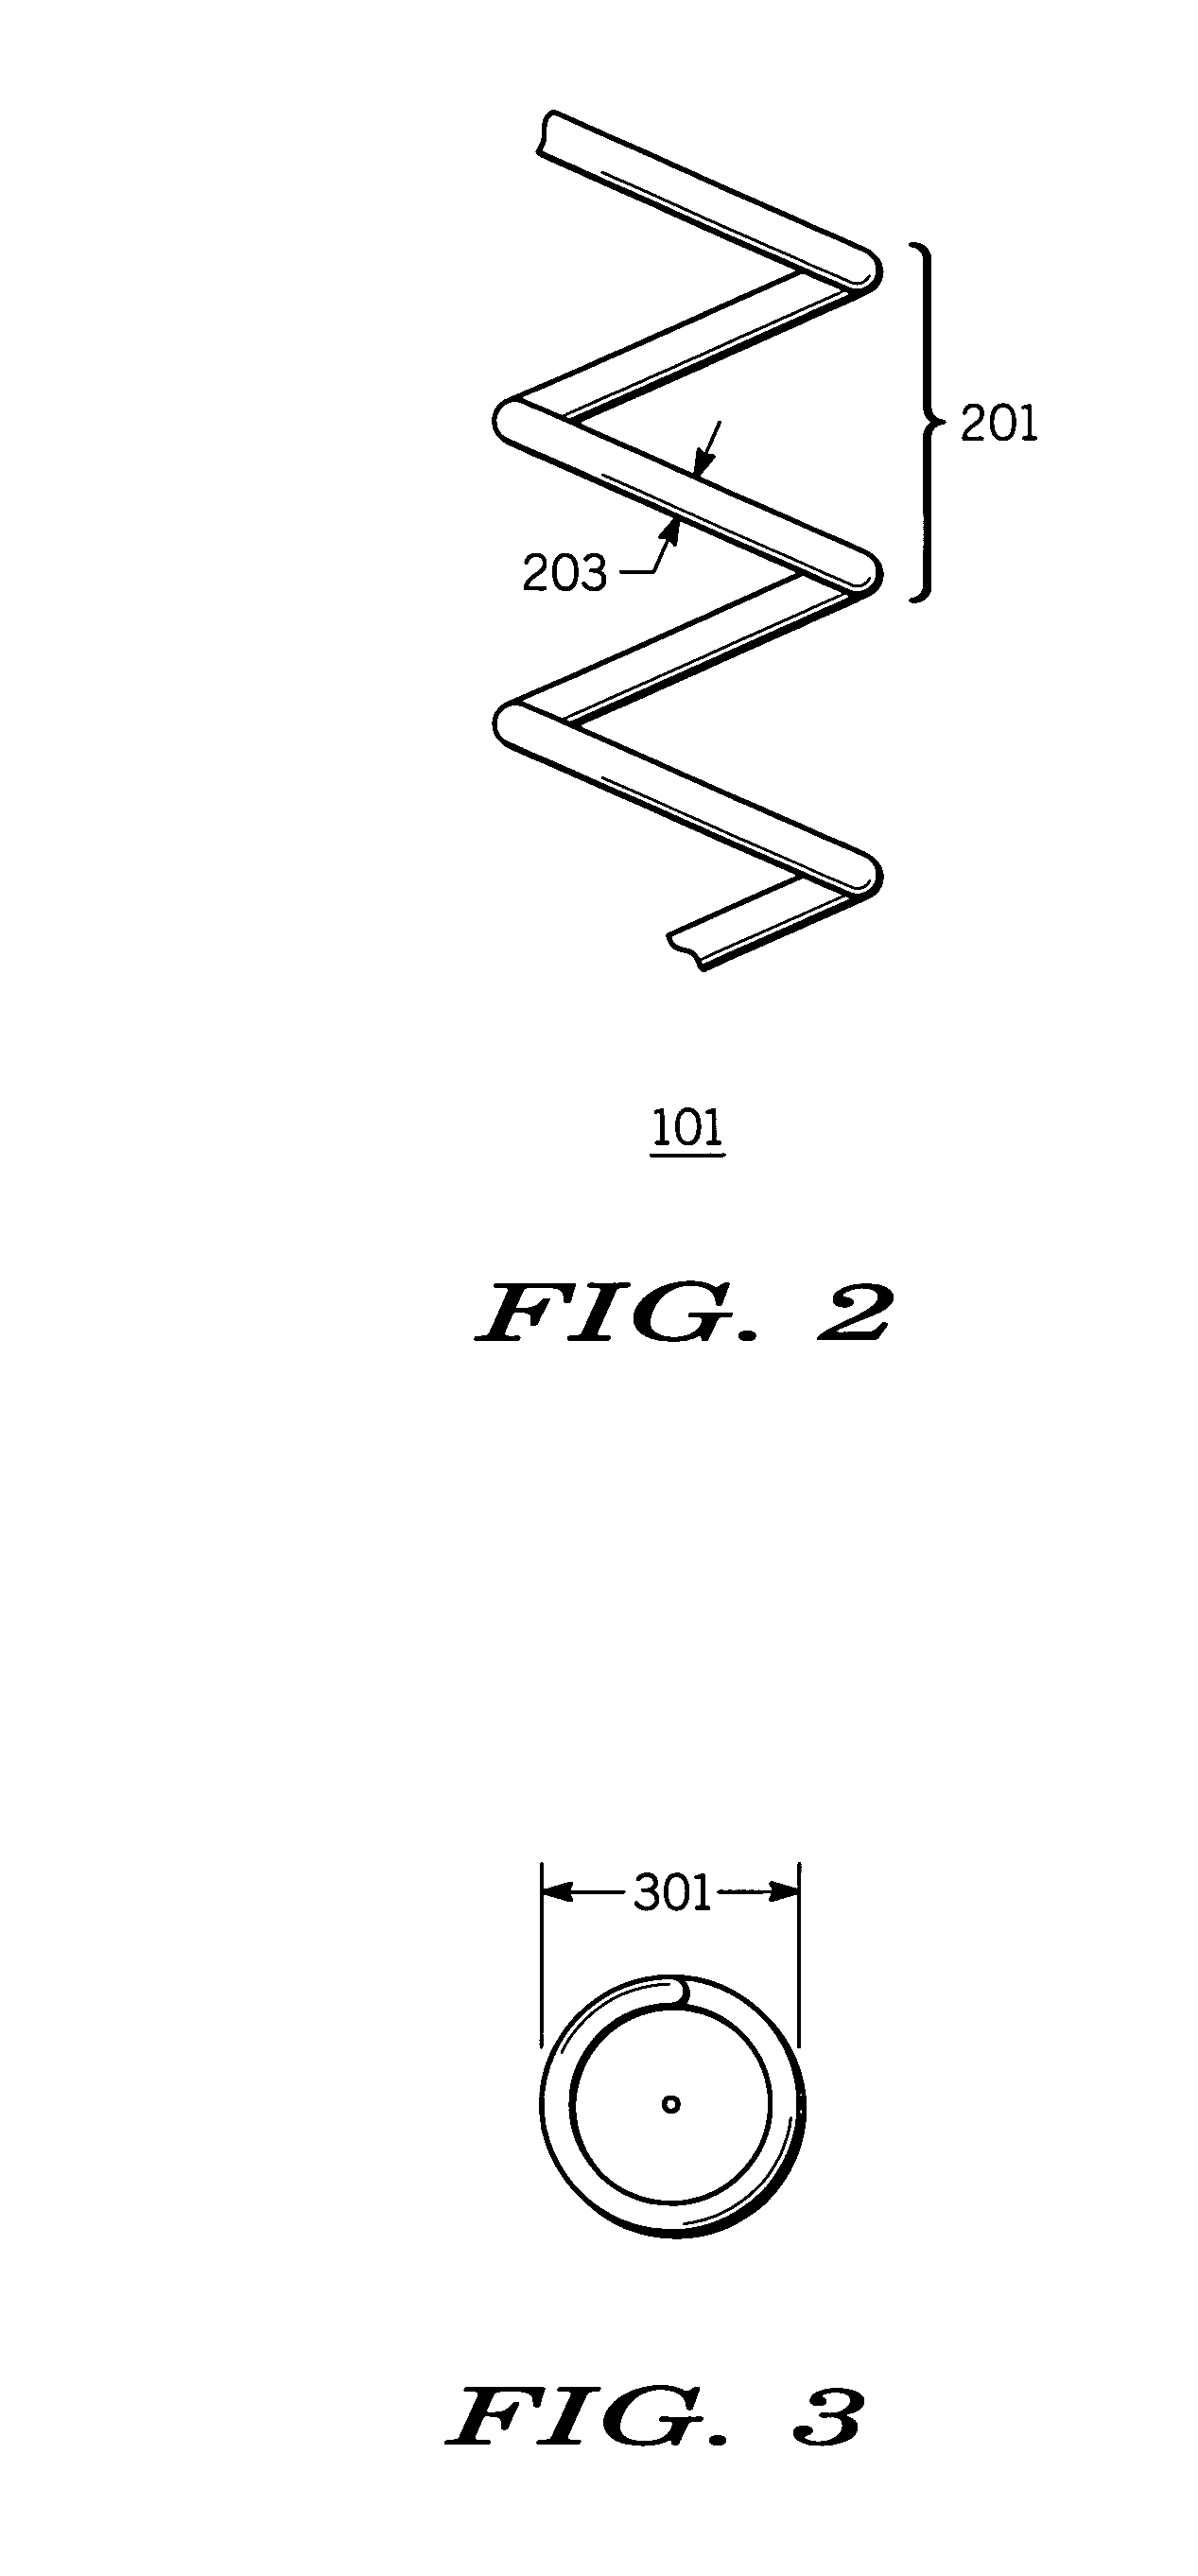 Helical antenna with integrated notch filter